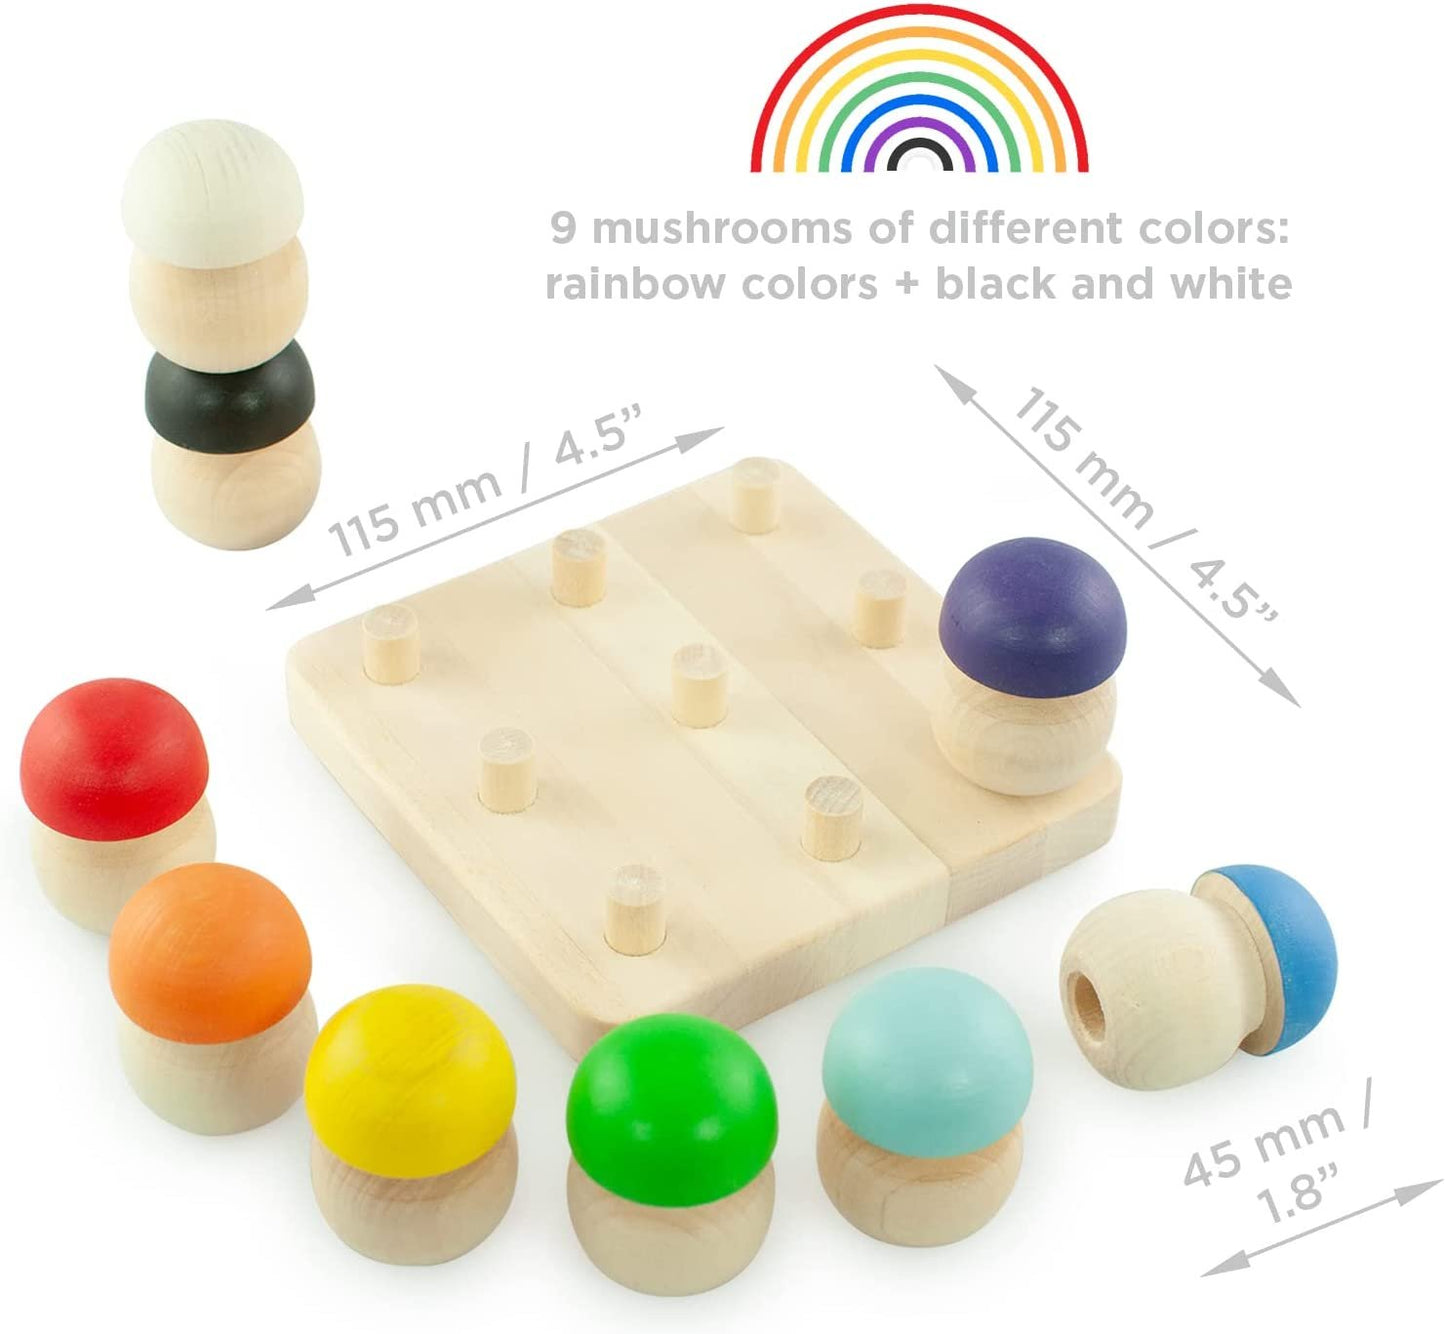 Ulanik Mushroom Glade Toddler Montessori Toys for 3 Year Old + Kids Wooden Mushrooms Game for Learning Color Sorting and Counting